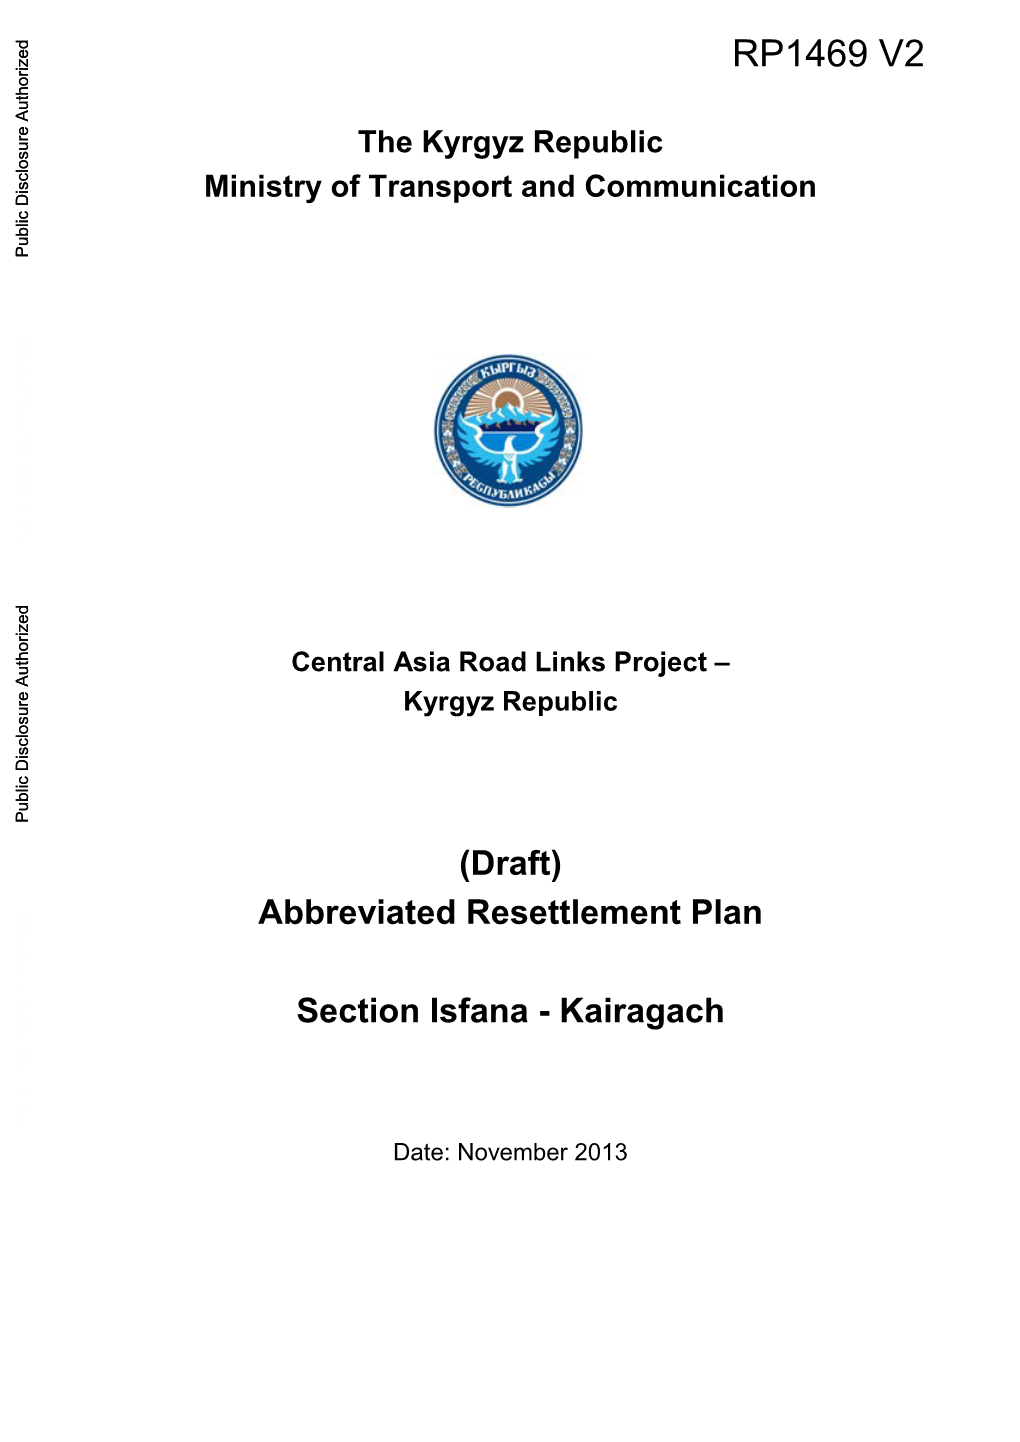 Abbreviated Resettlement Plan Section Isfana